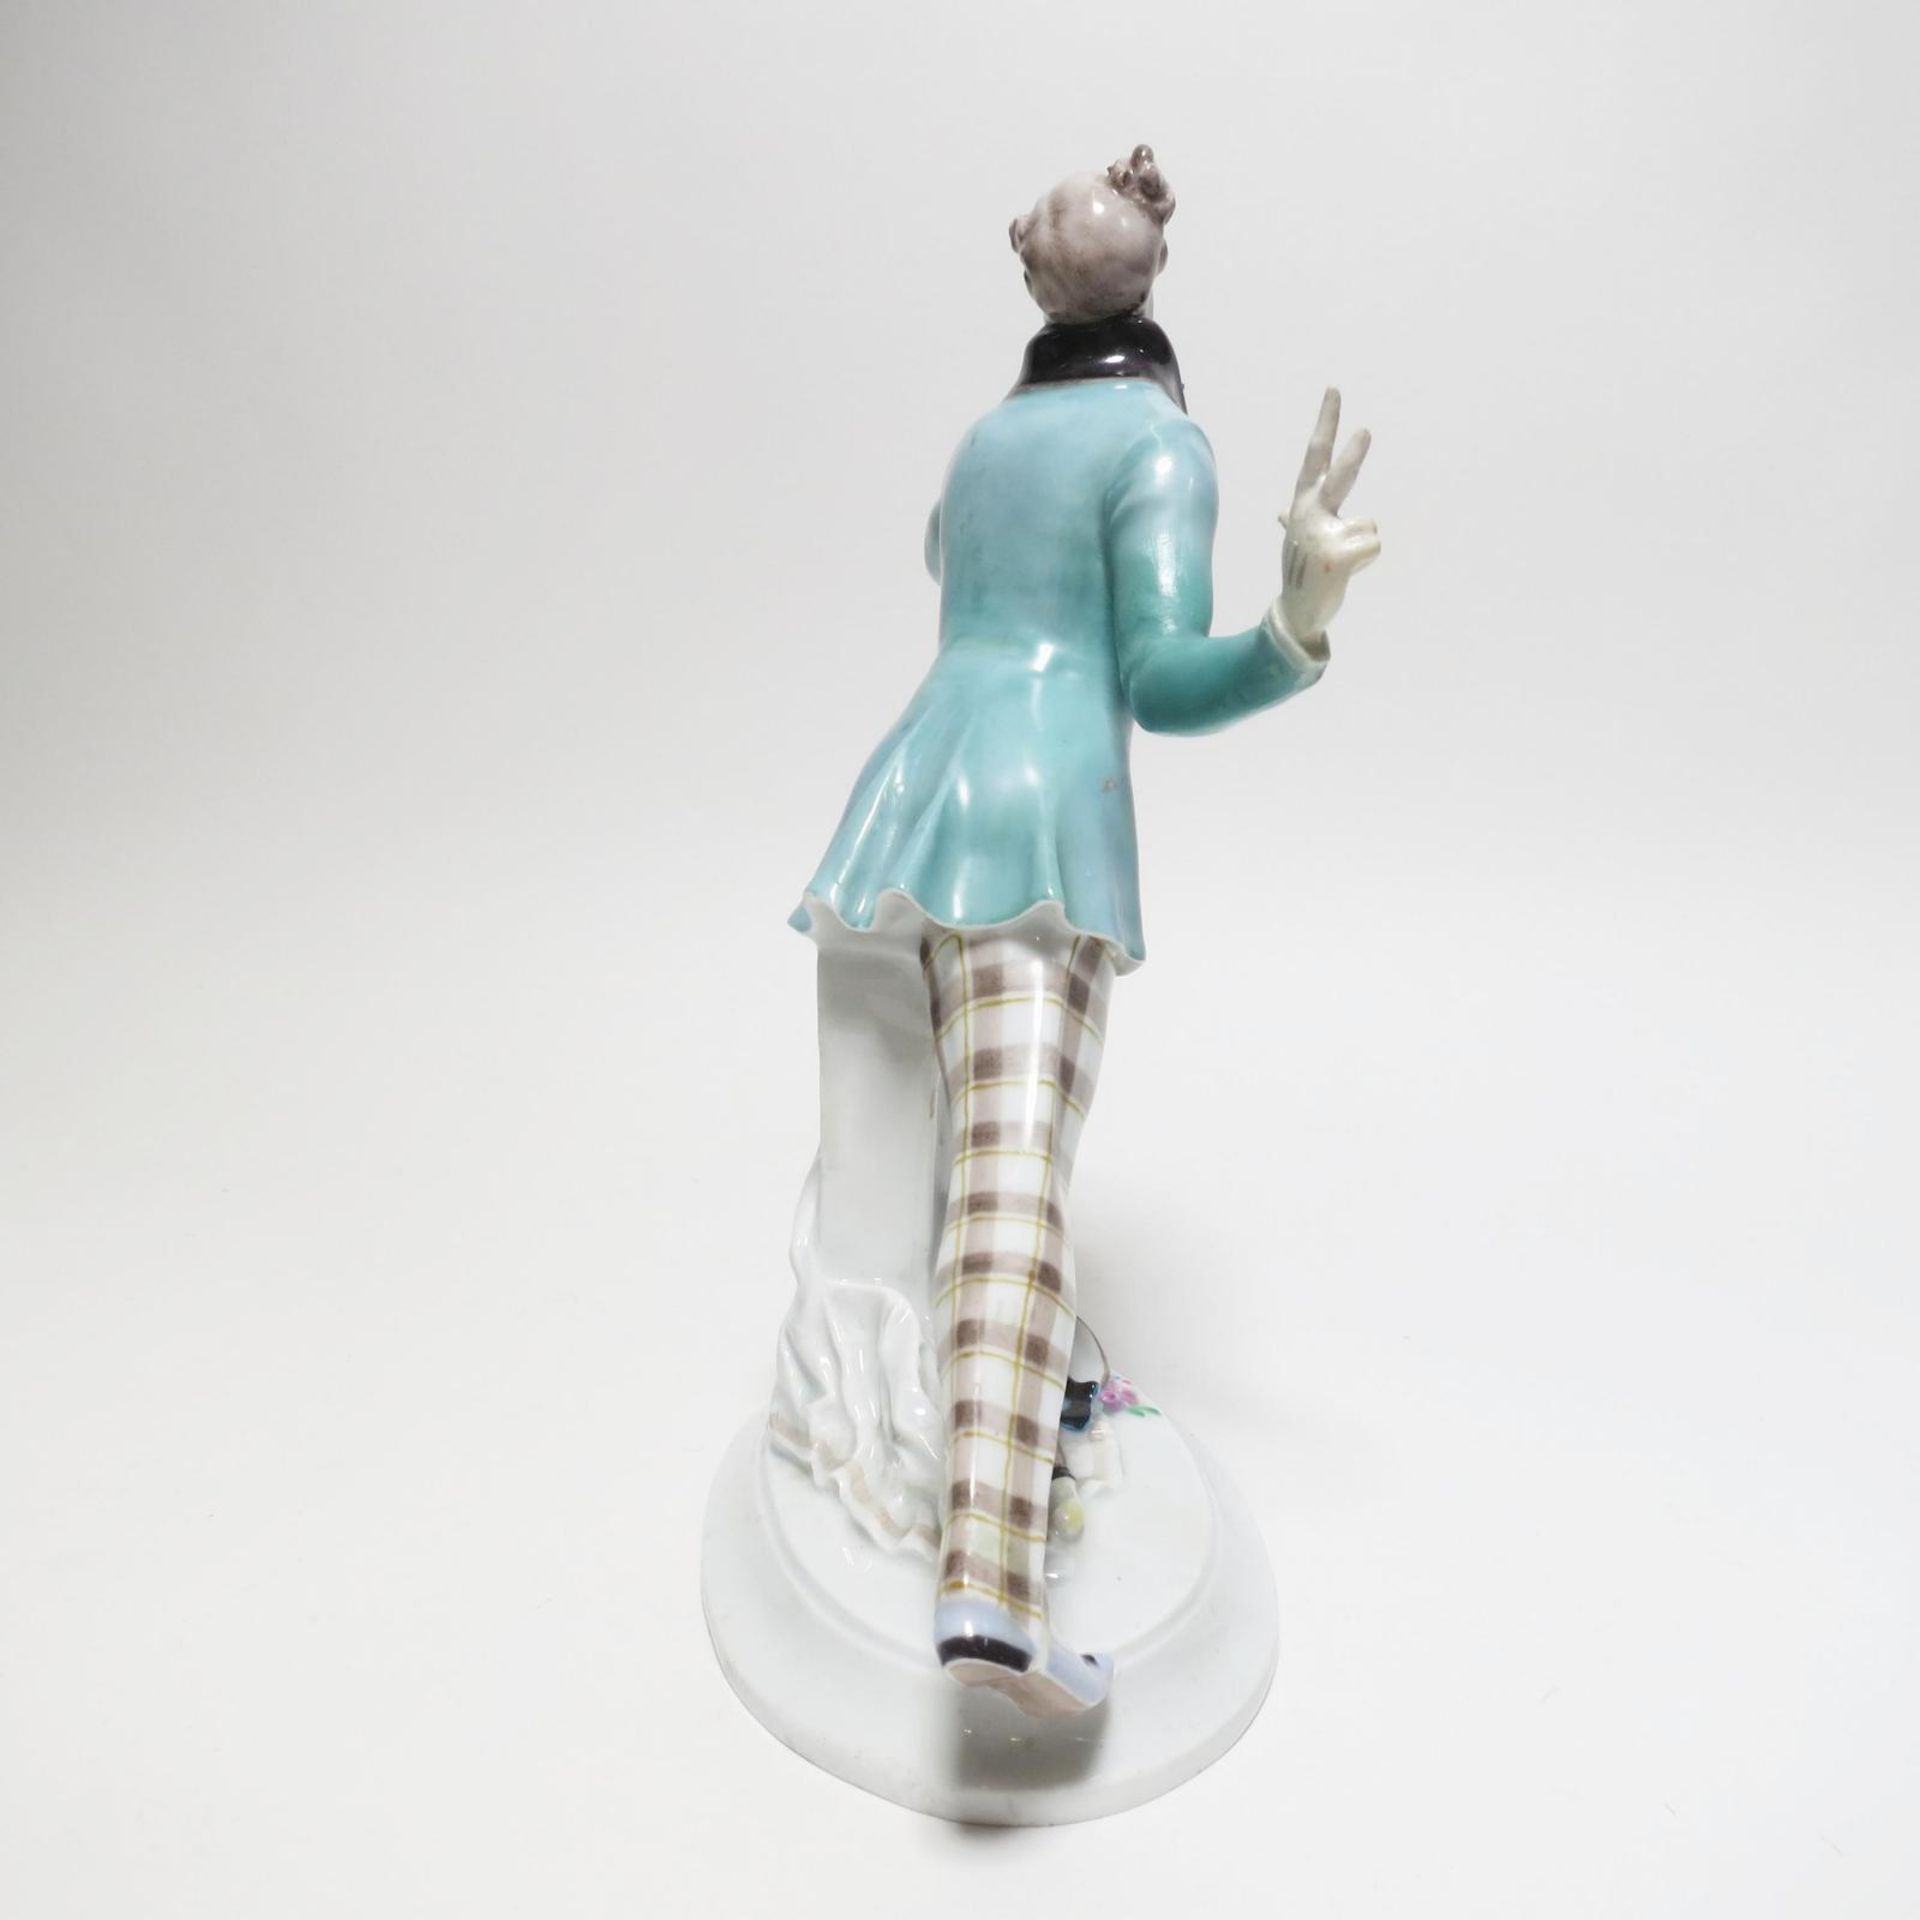 Meissen: PORCELAIN FIGURINES OF THE 'RUSSIAN BALLET' - Image 49 of 49